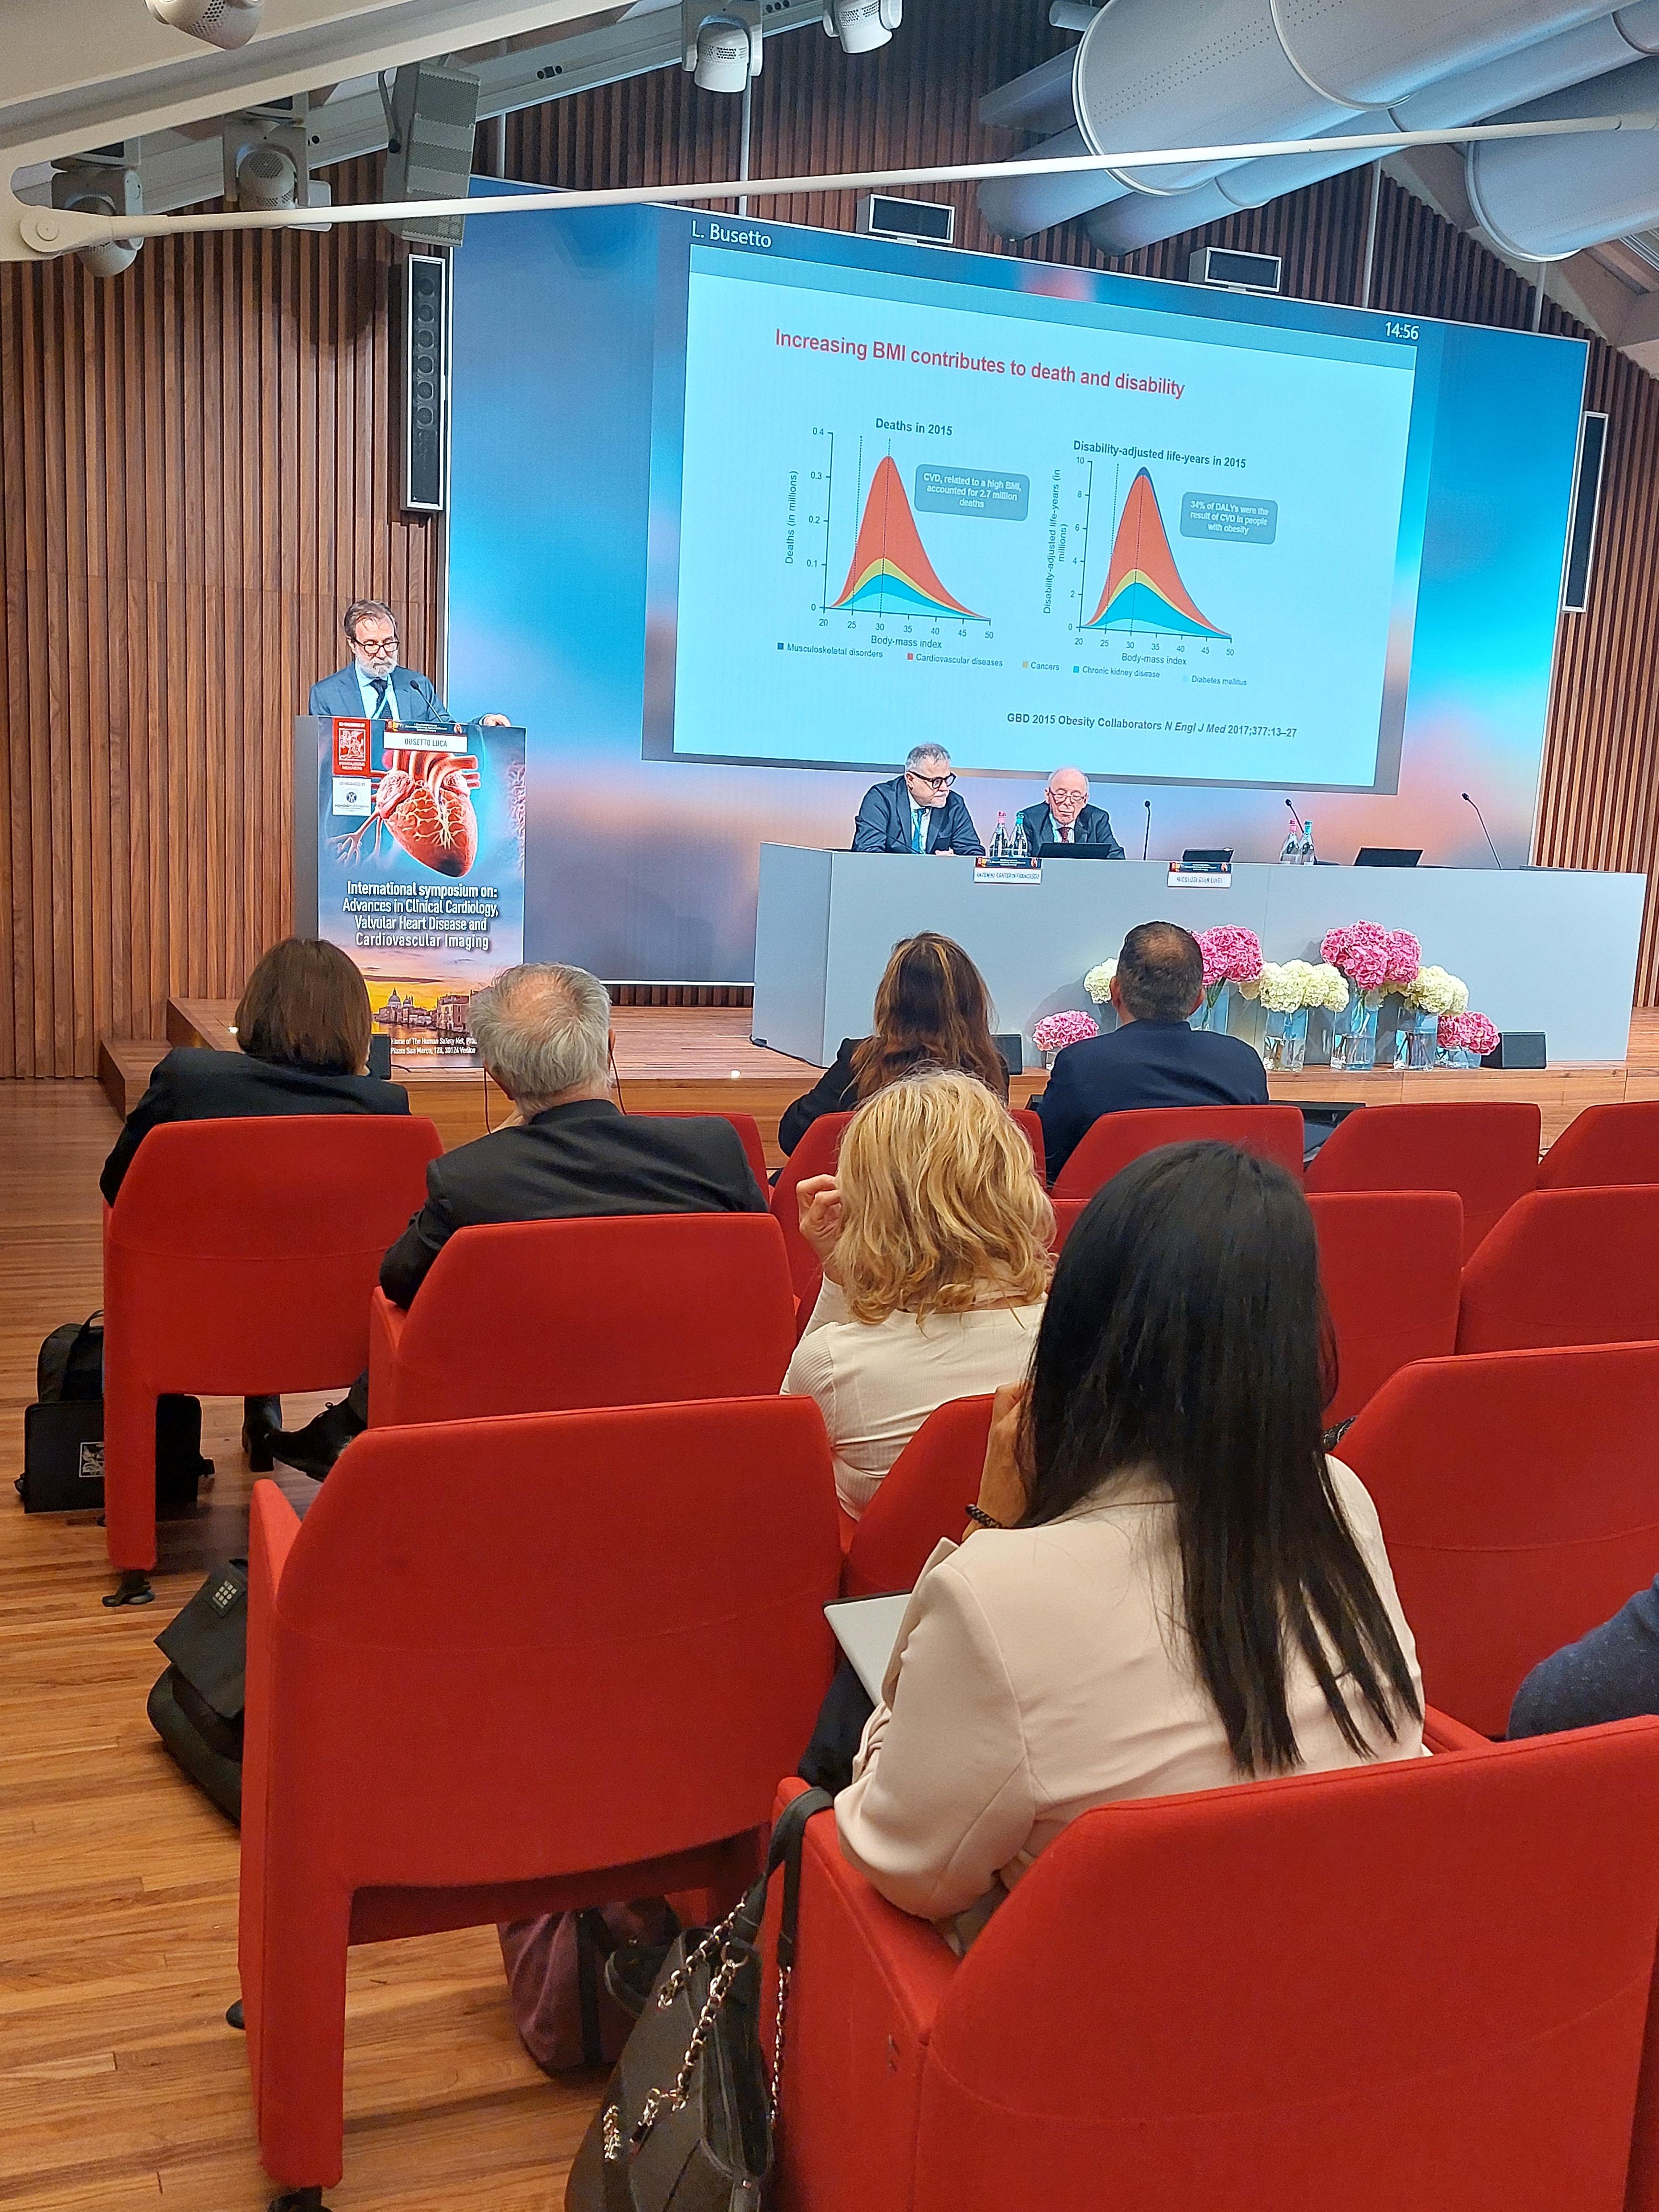 International Symposium on: Advances in Clinical Cardiology, Valvular Heart Disease and Cardiovascular Imaging